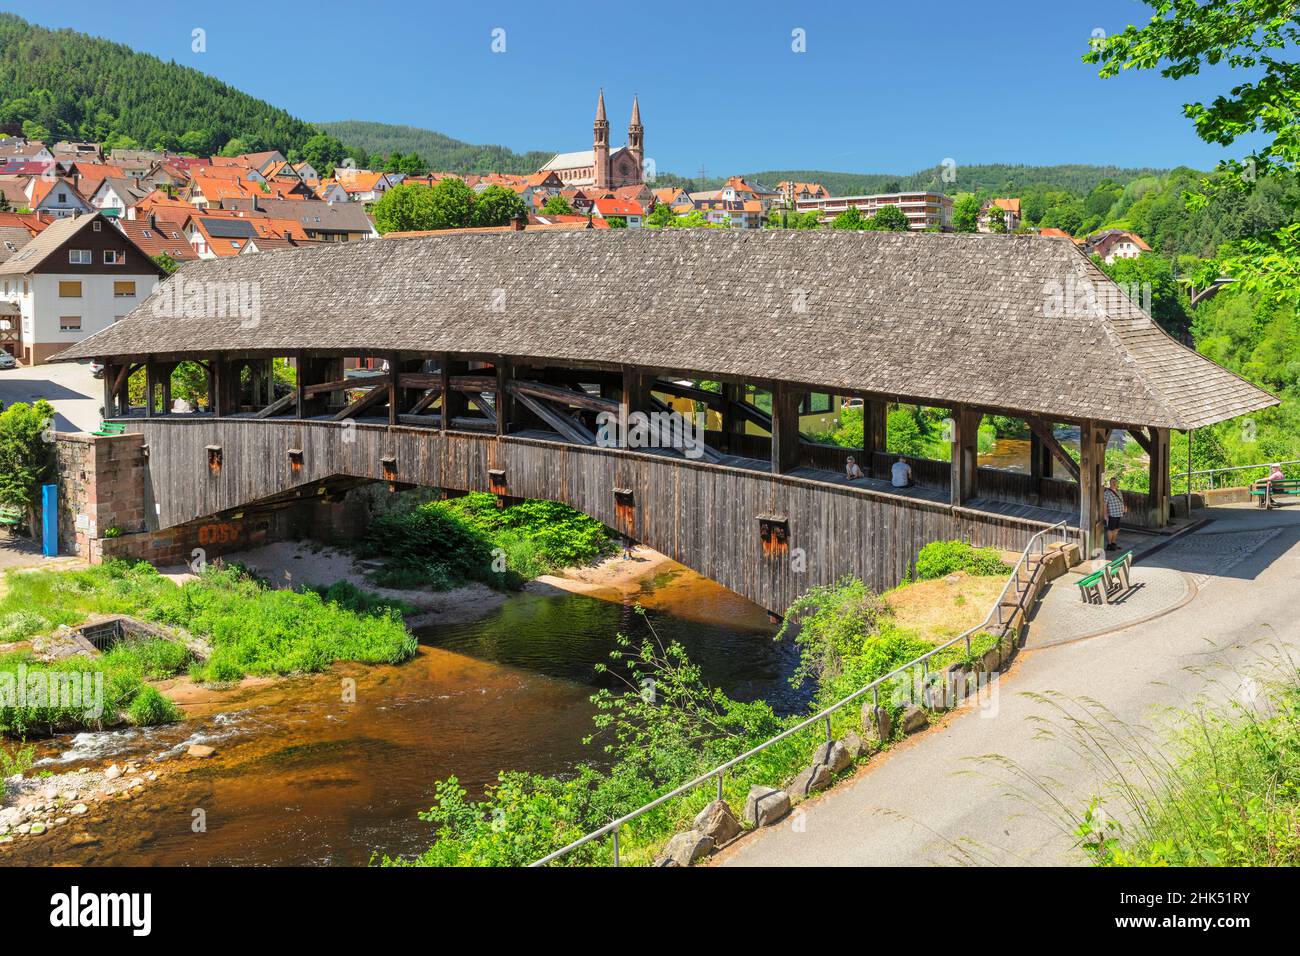 Wooden Bridge over Murg River, Forbach, Murgtal Valley, Black Forest, Baden-Wurttemberg, Germany, Europe Stock Photo